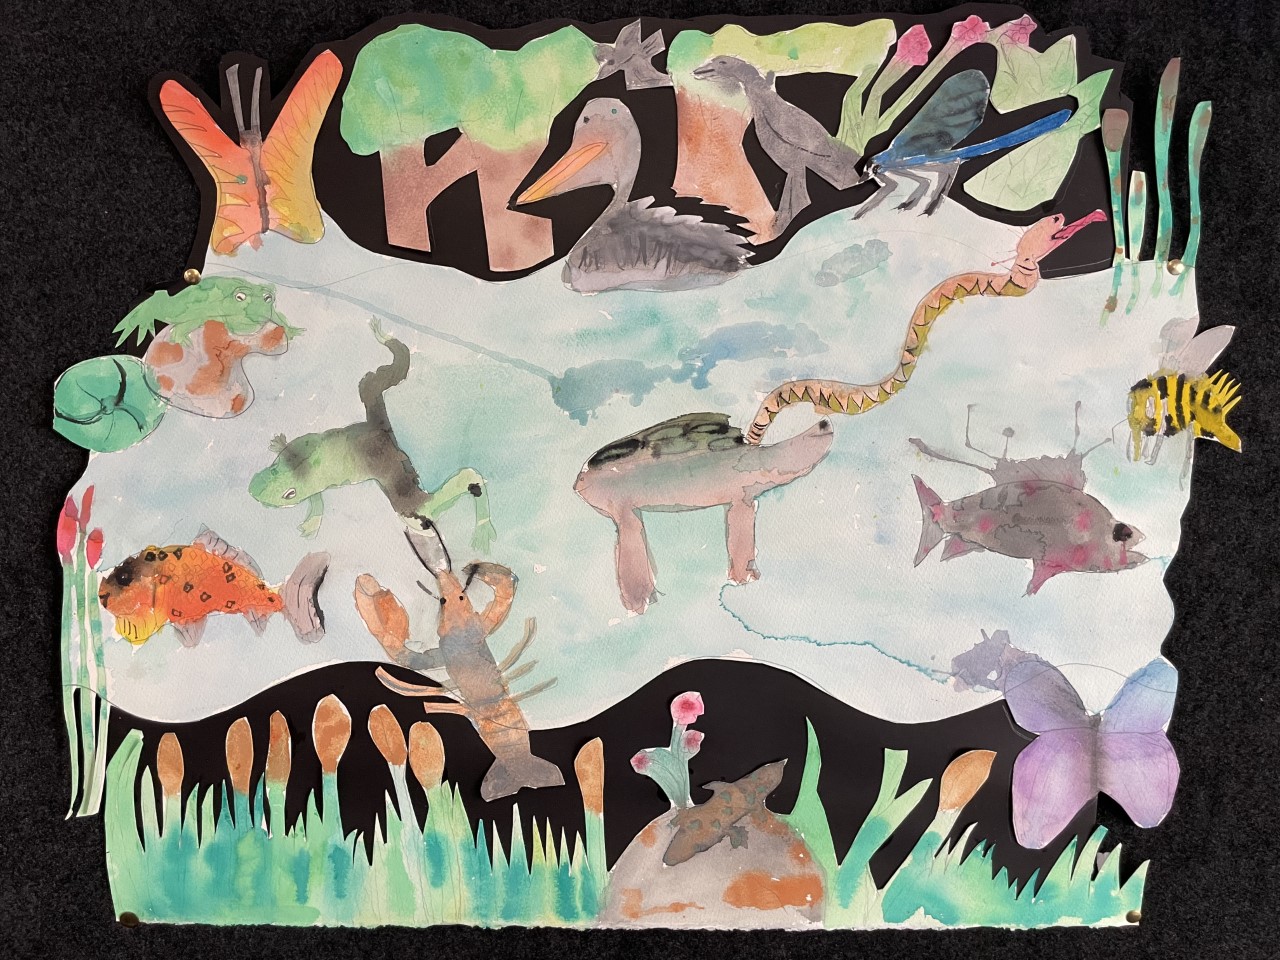 A watercolour depicting a river and the Australian animals that live around it including a frog, pelican, bee, fish, butterfly, prawn birds, grasshopper, snake, turtle.